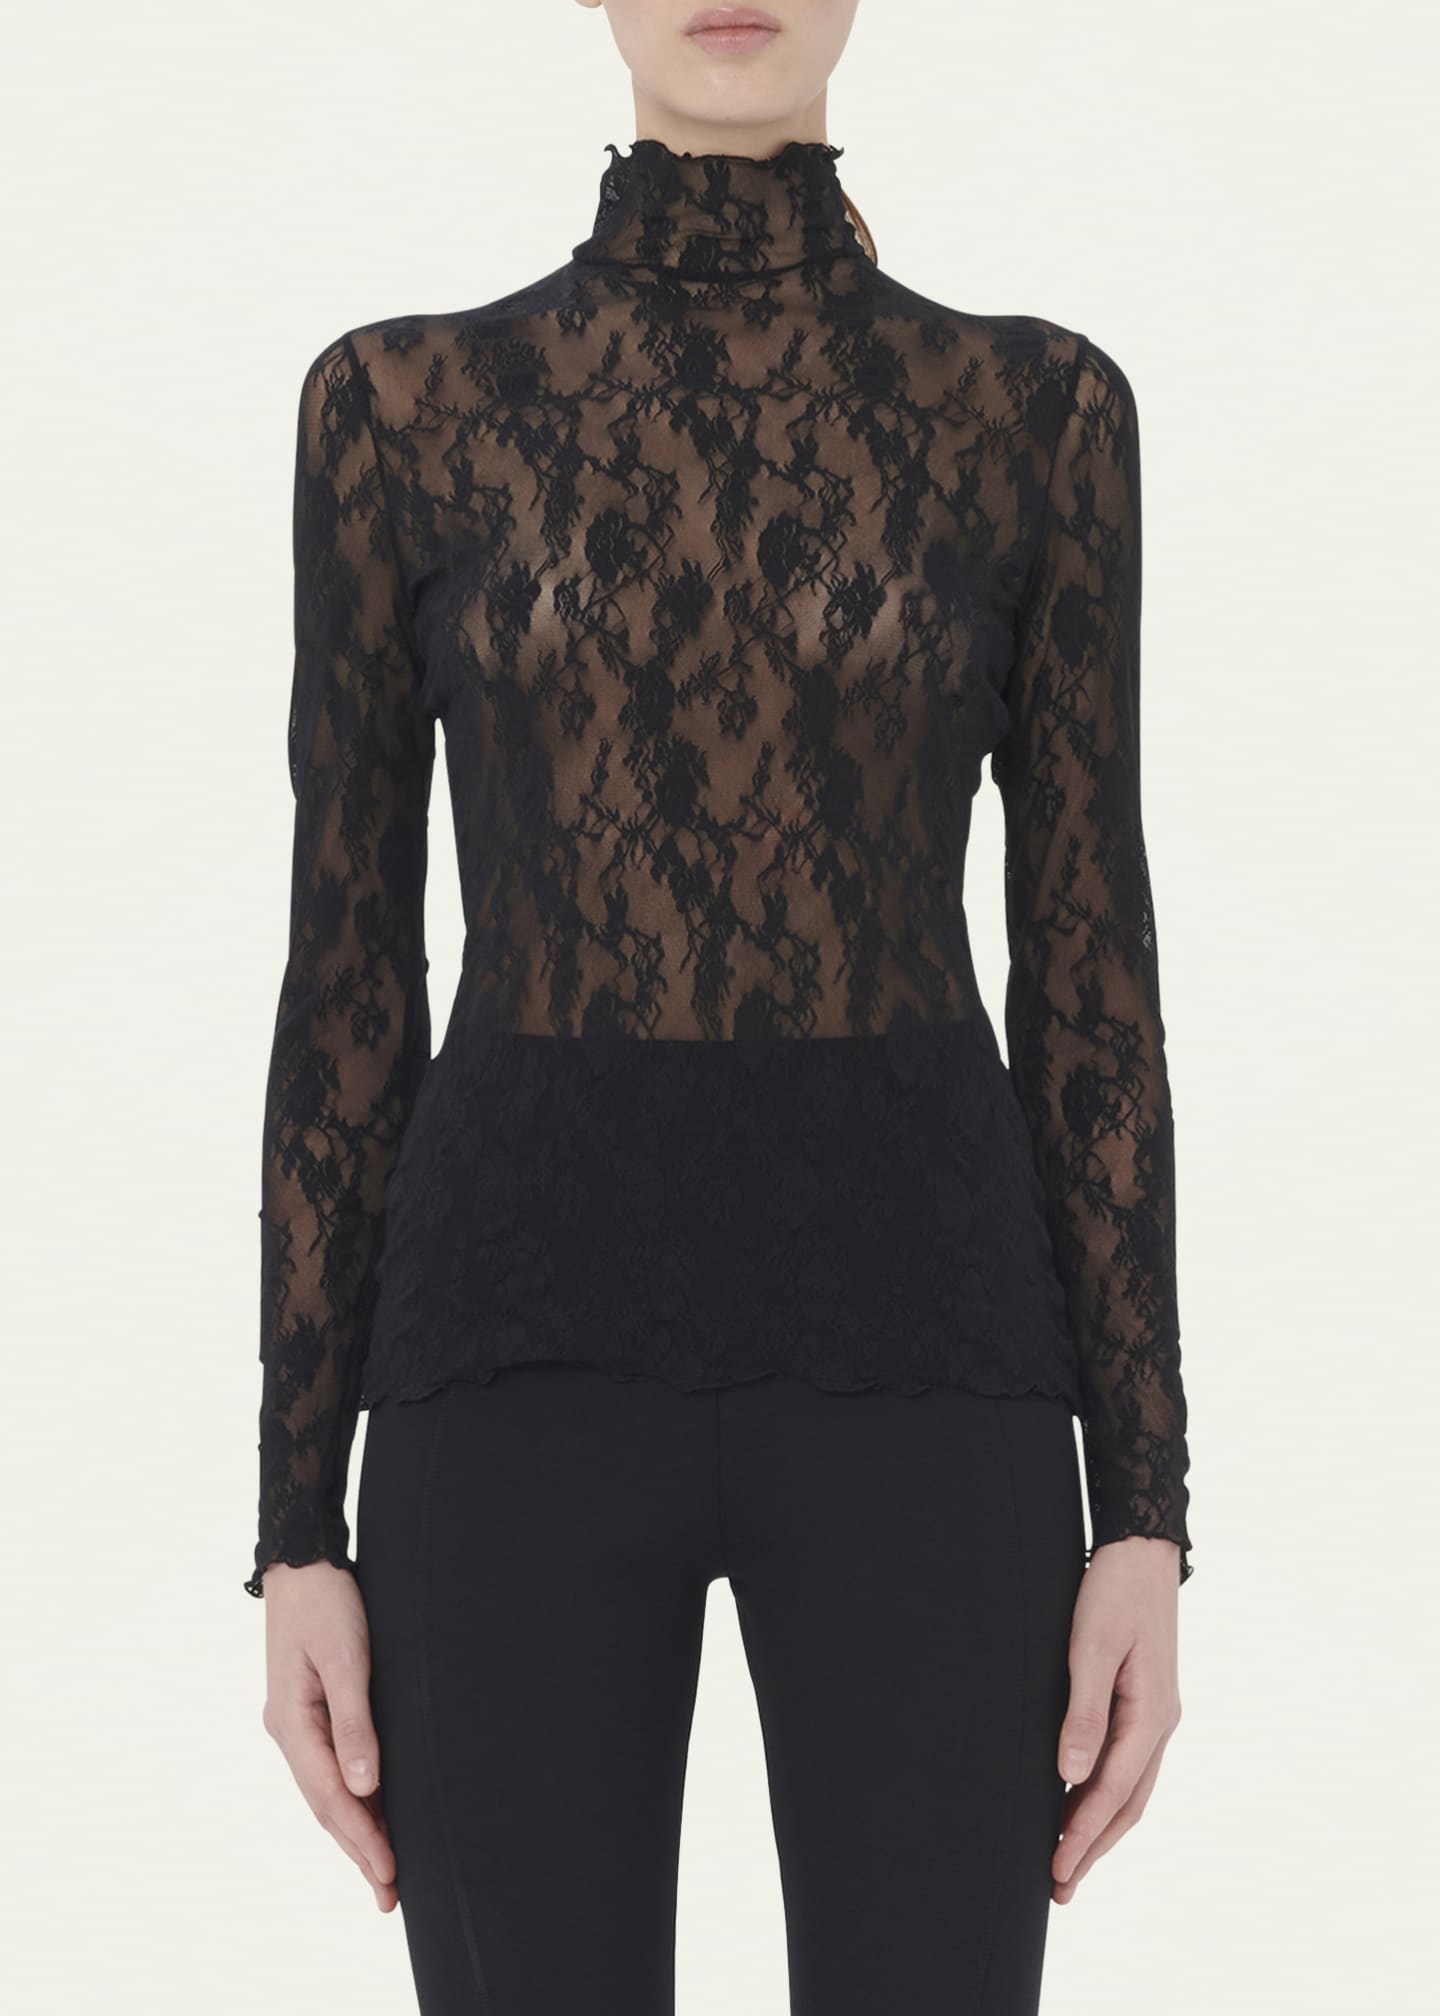 Wolford Turtleneck Floral Lace Top - Bergdorf Goodman